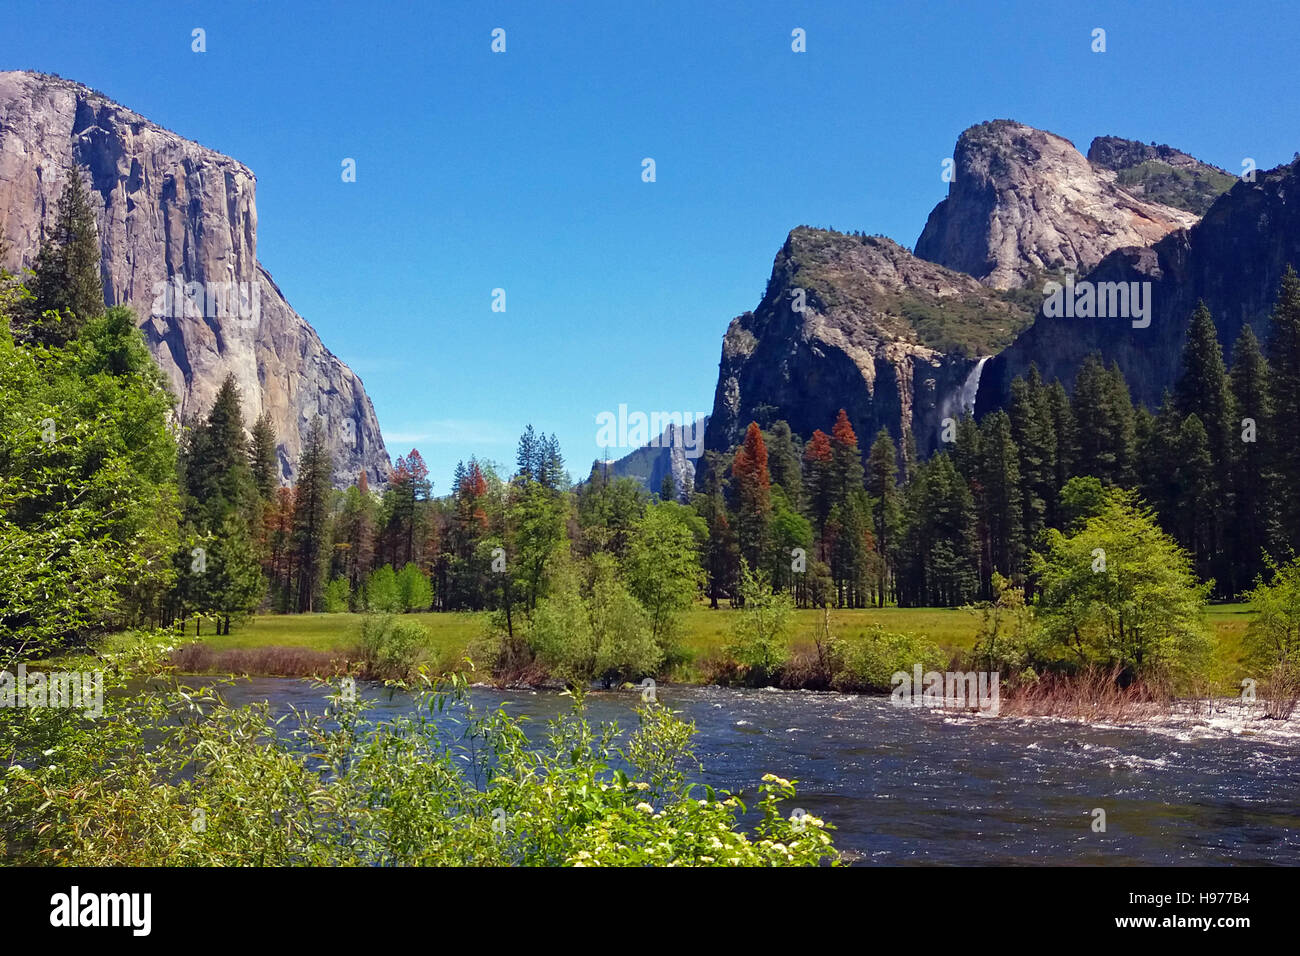 Merced river In Yosemite Valley. Bridalveil fall on background. Yosemite National Park on May. Stock Photo